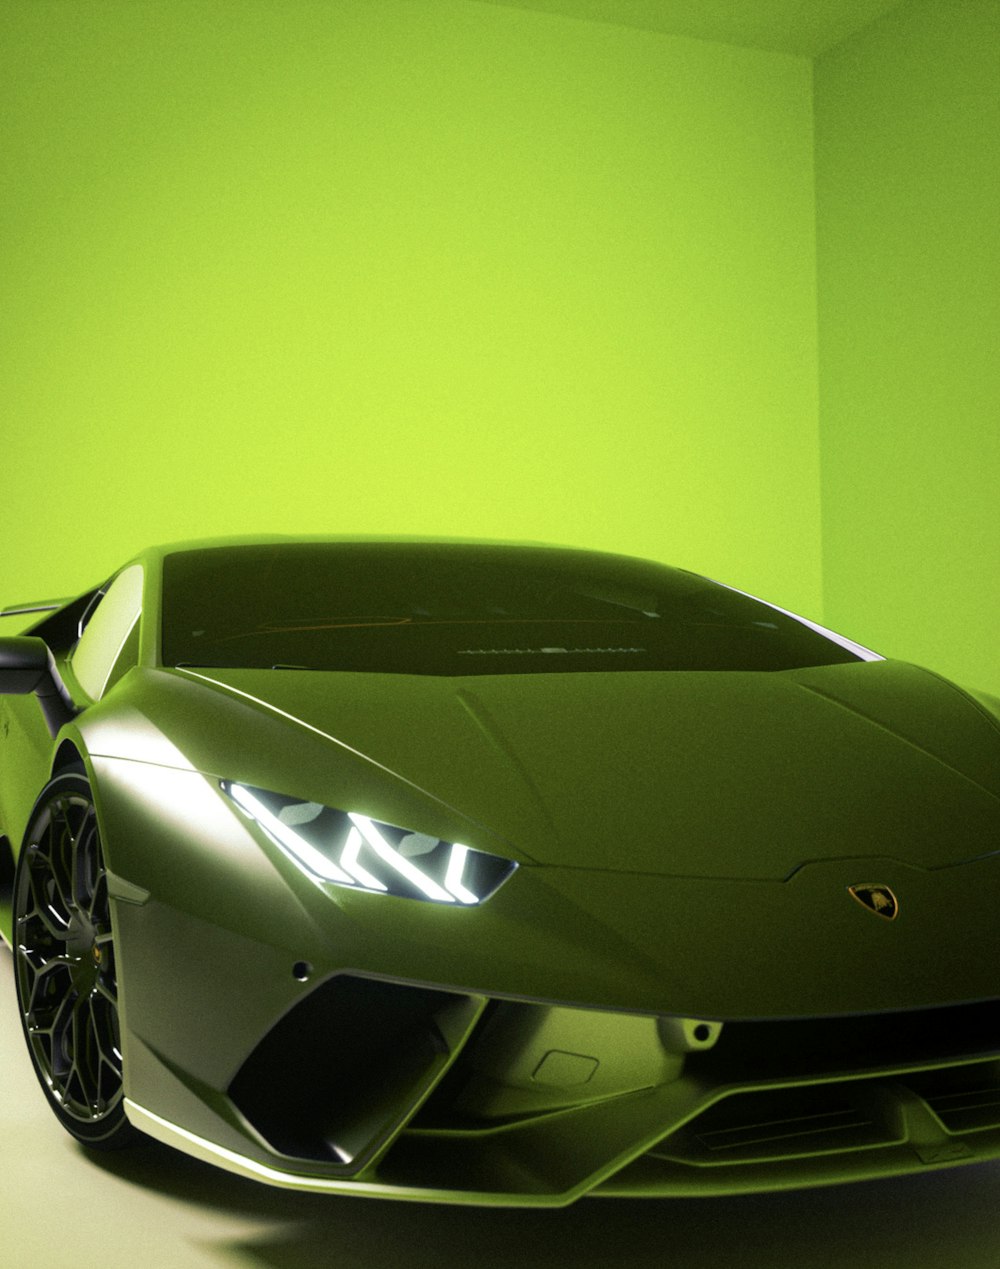 a green sports car in a green room